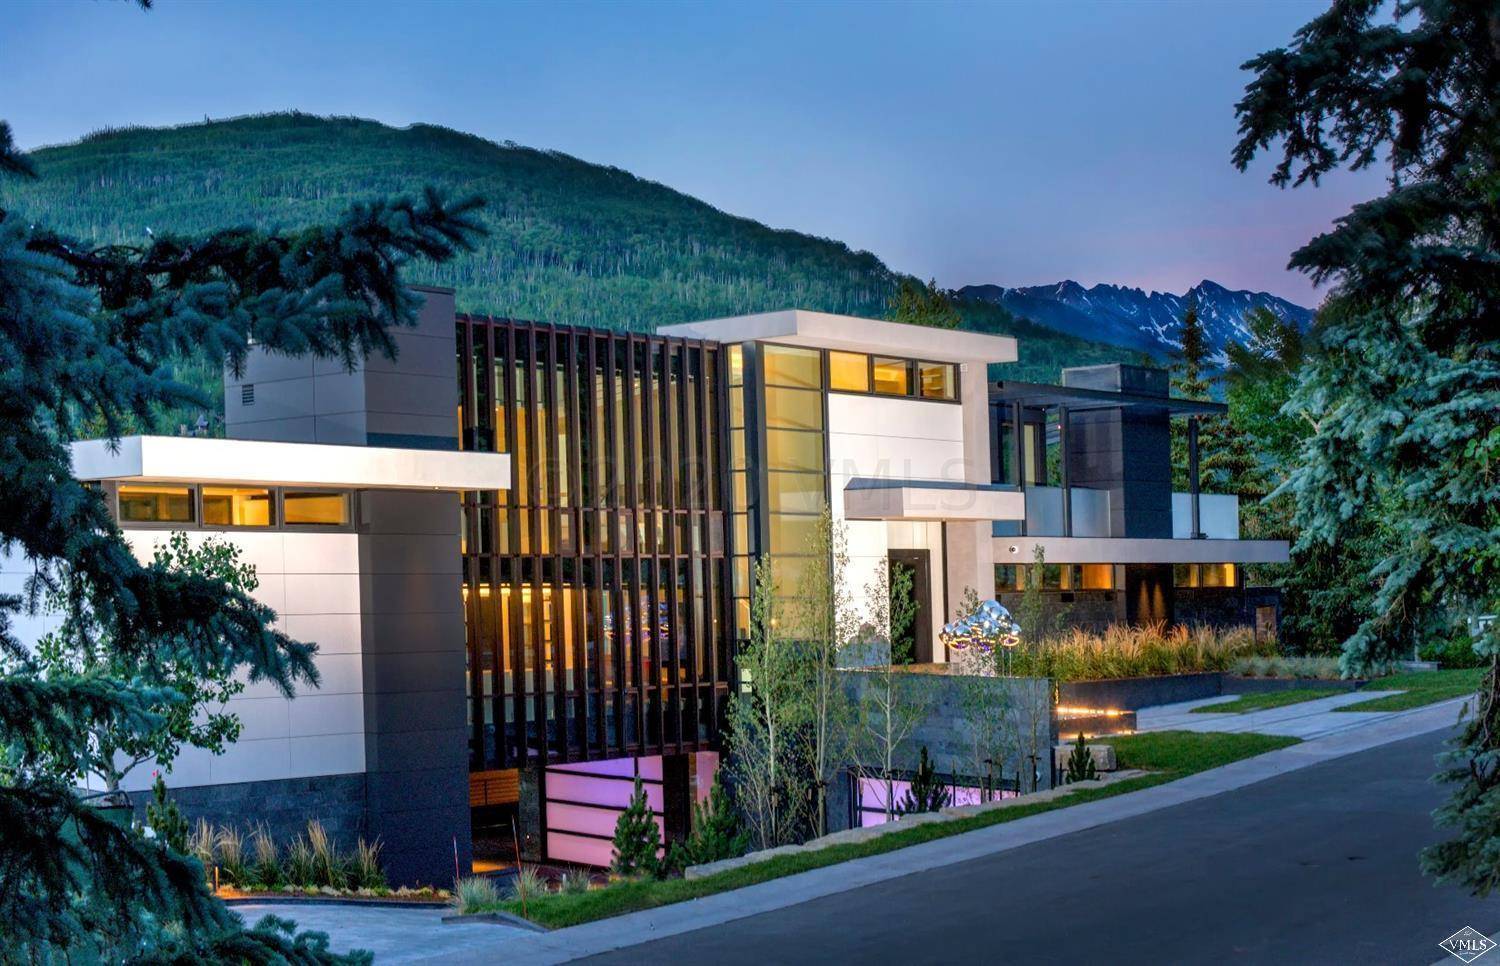 This amazing luxury retreat is located on Vail Mountain, surrounded by world class skiing, and it is the most exquisite contemporary estate in Vail.